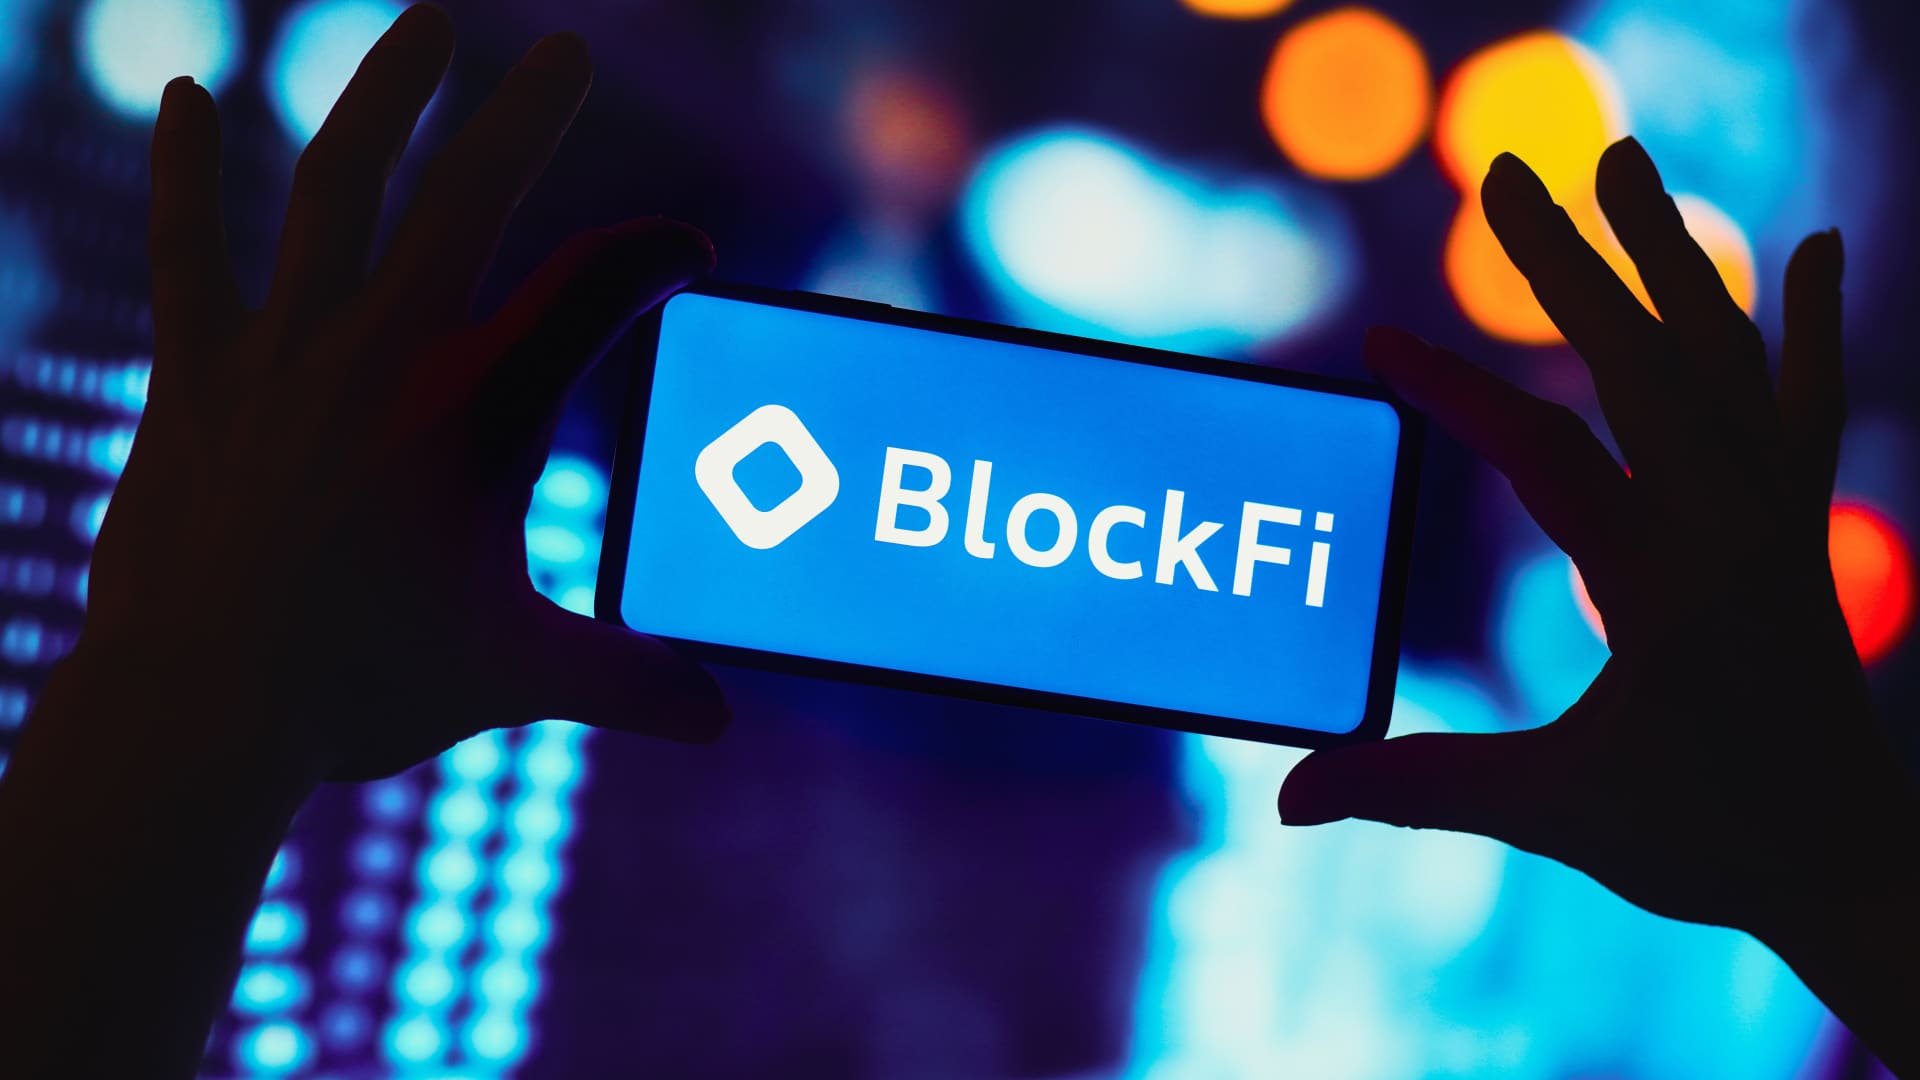 BlockFi lawyer tells bankruptcy court that the priority is to ‘maximize client recoveries’